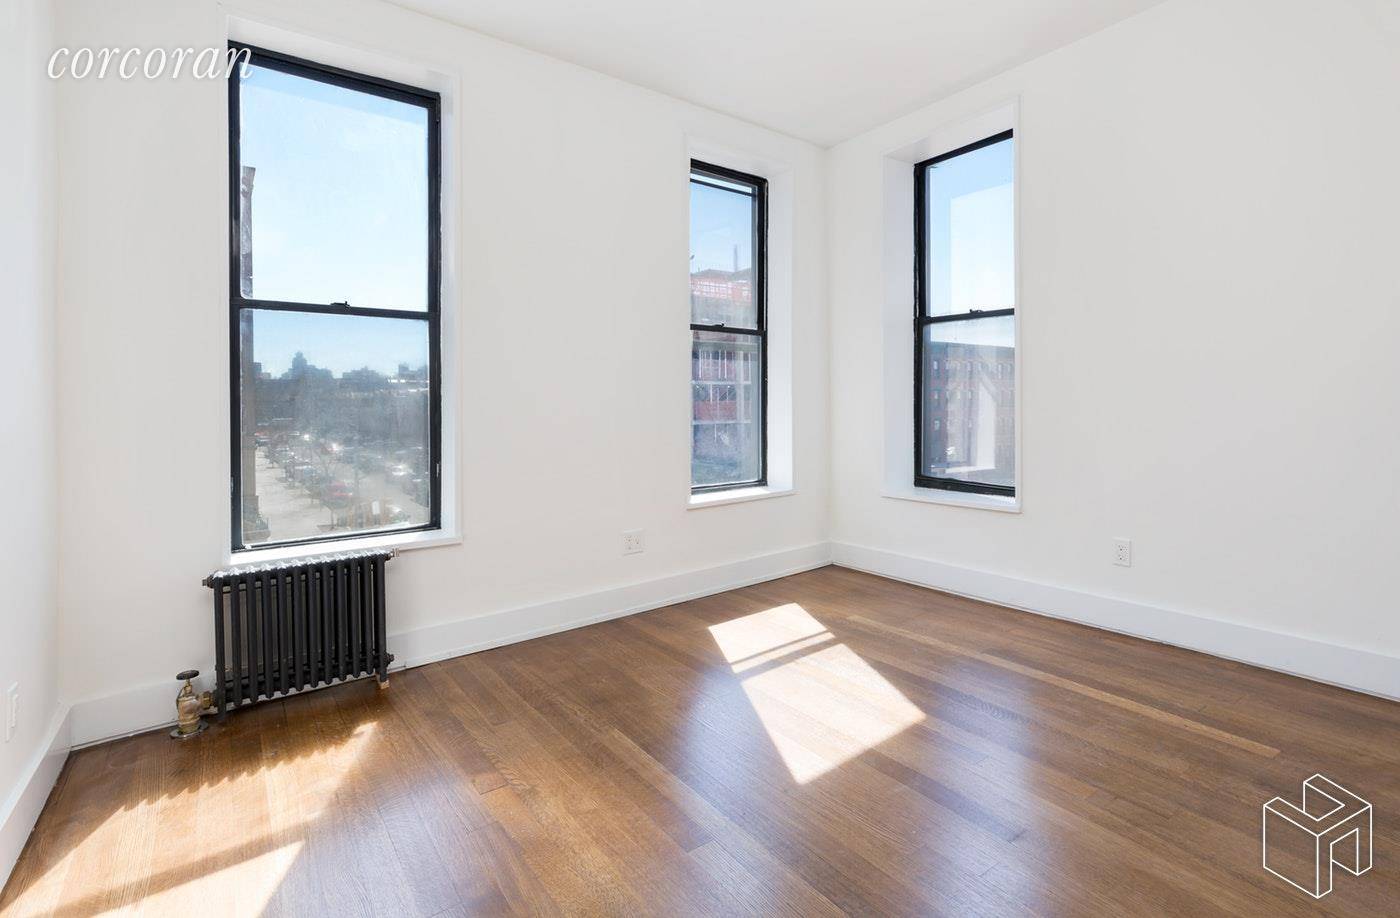 NO FEE Three bedroom two bathroom apartment for rent in Boerum Hill Park Slope Gowanus.